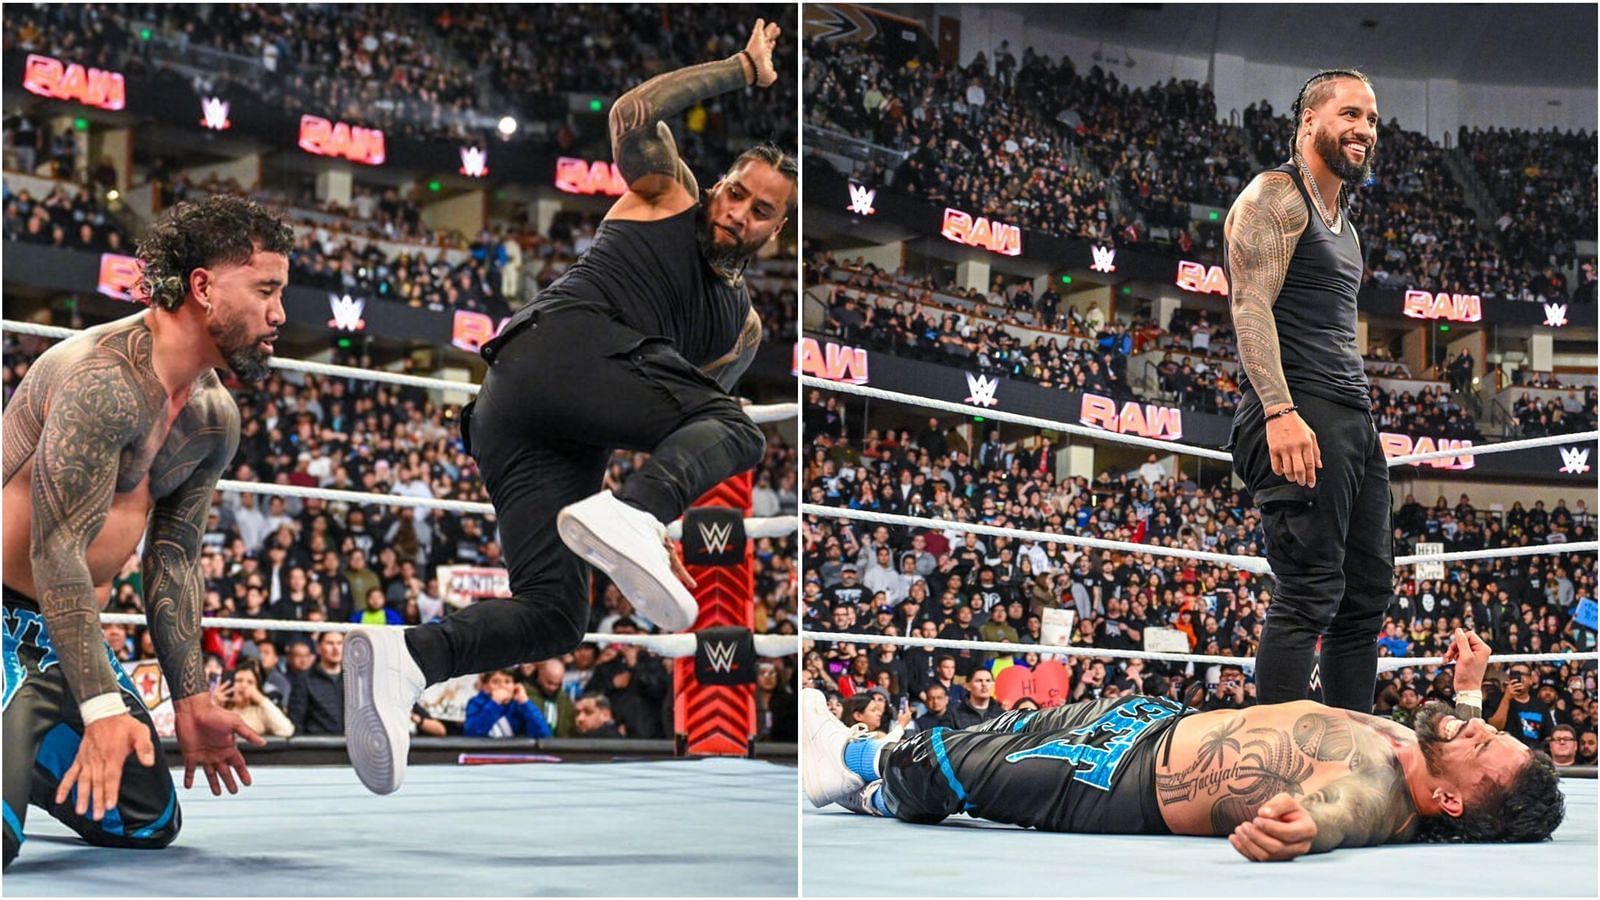 Jimmy Uso once again cost Jey Uso a title match!